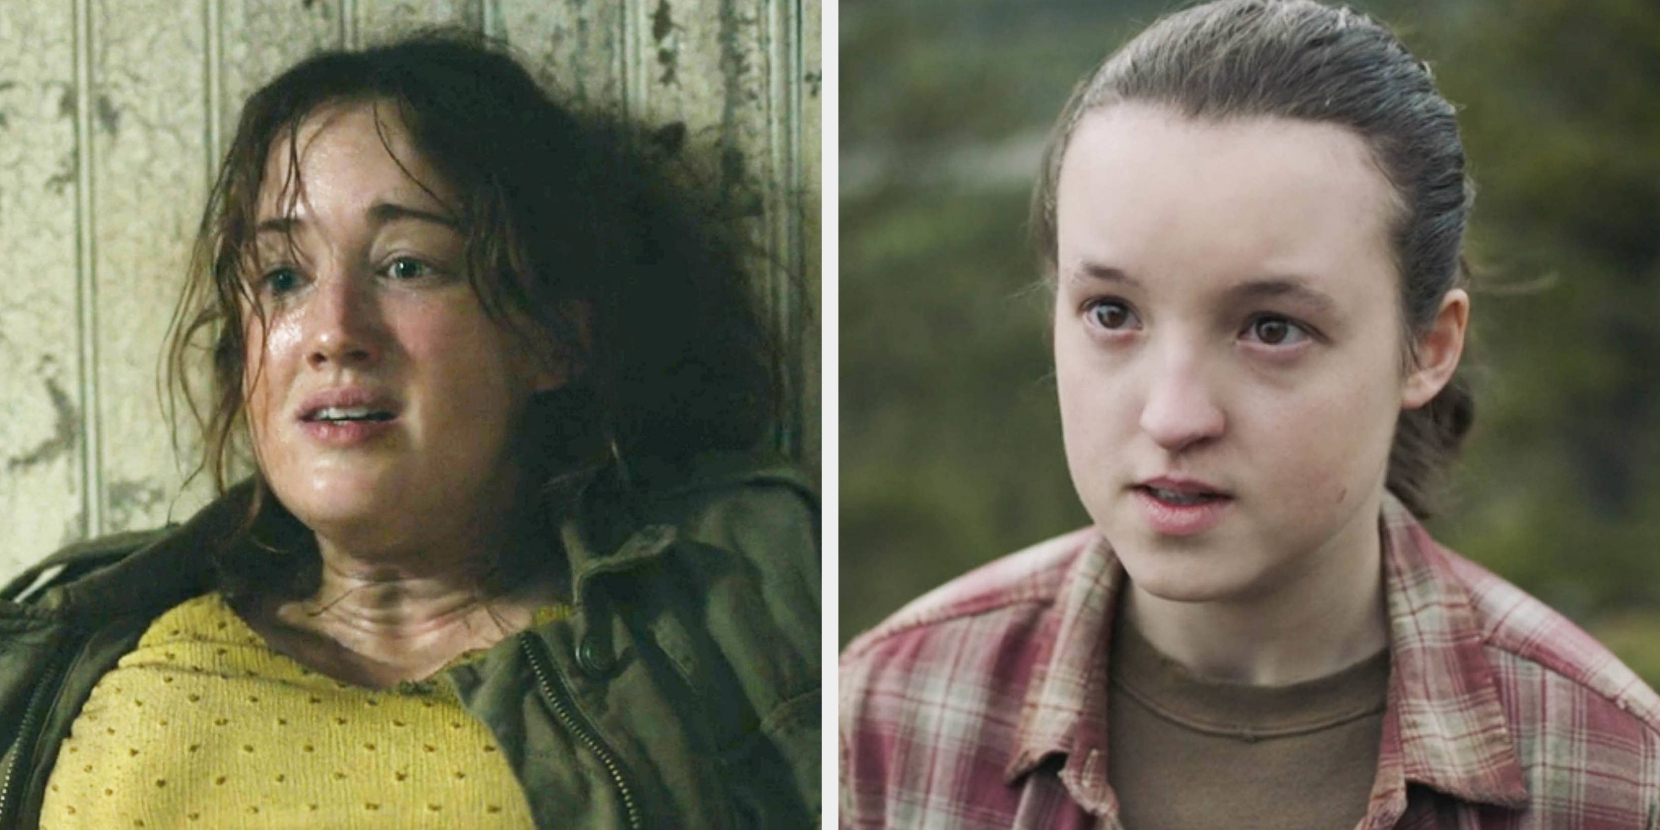 Who Plays Ellie in HBO's 'The Last of Us